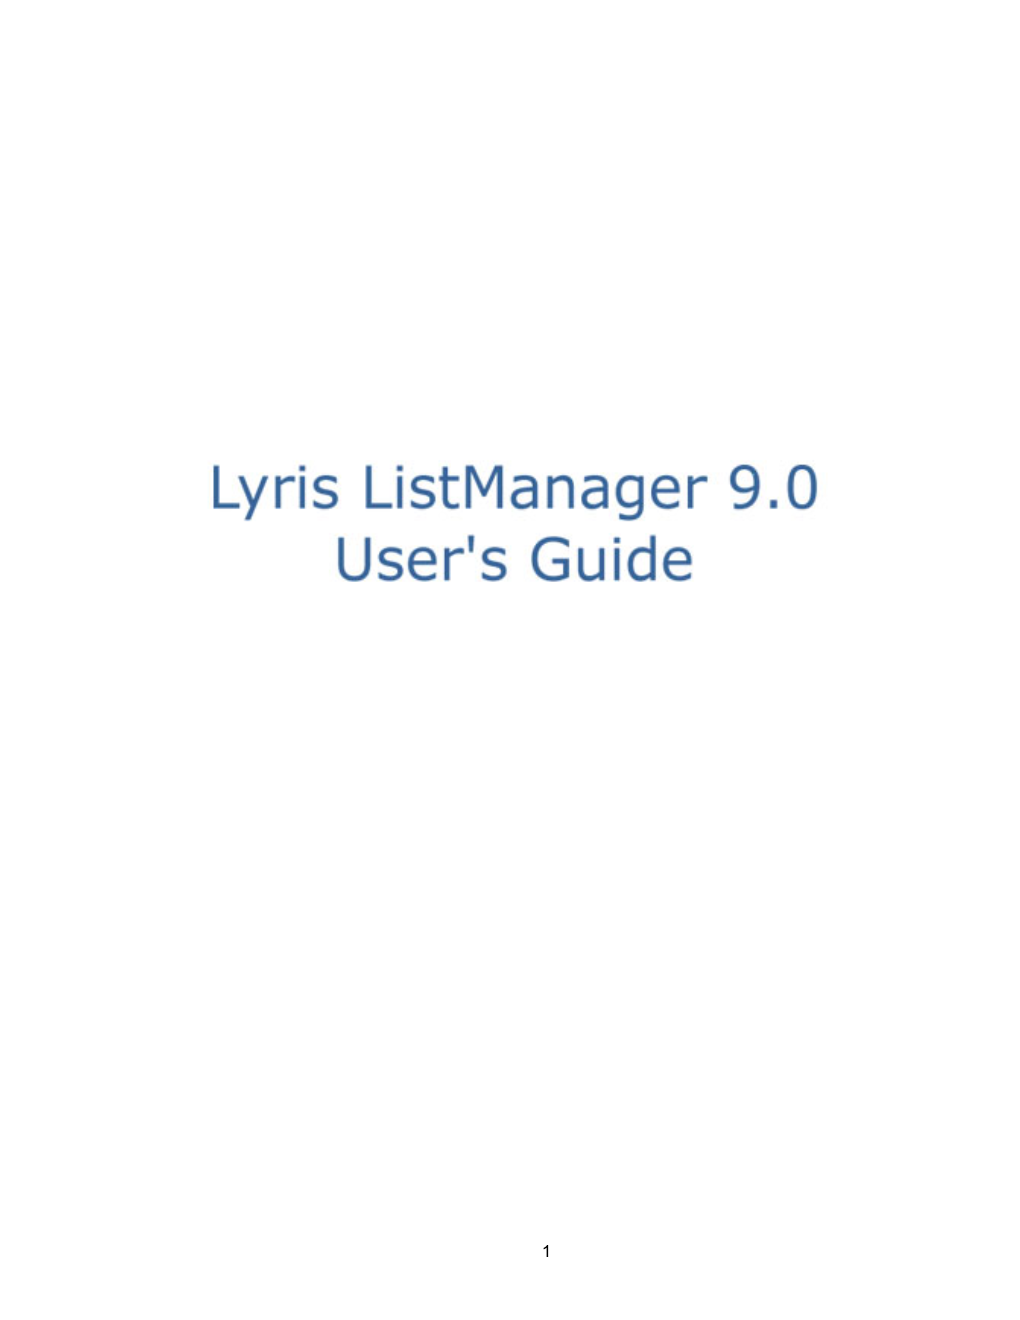 Microsoft SQL and Listmanager